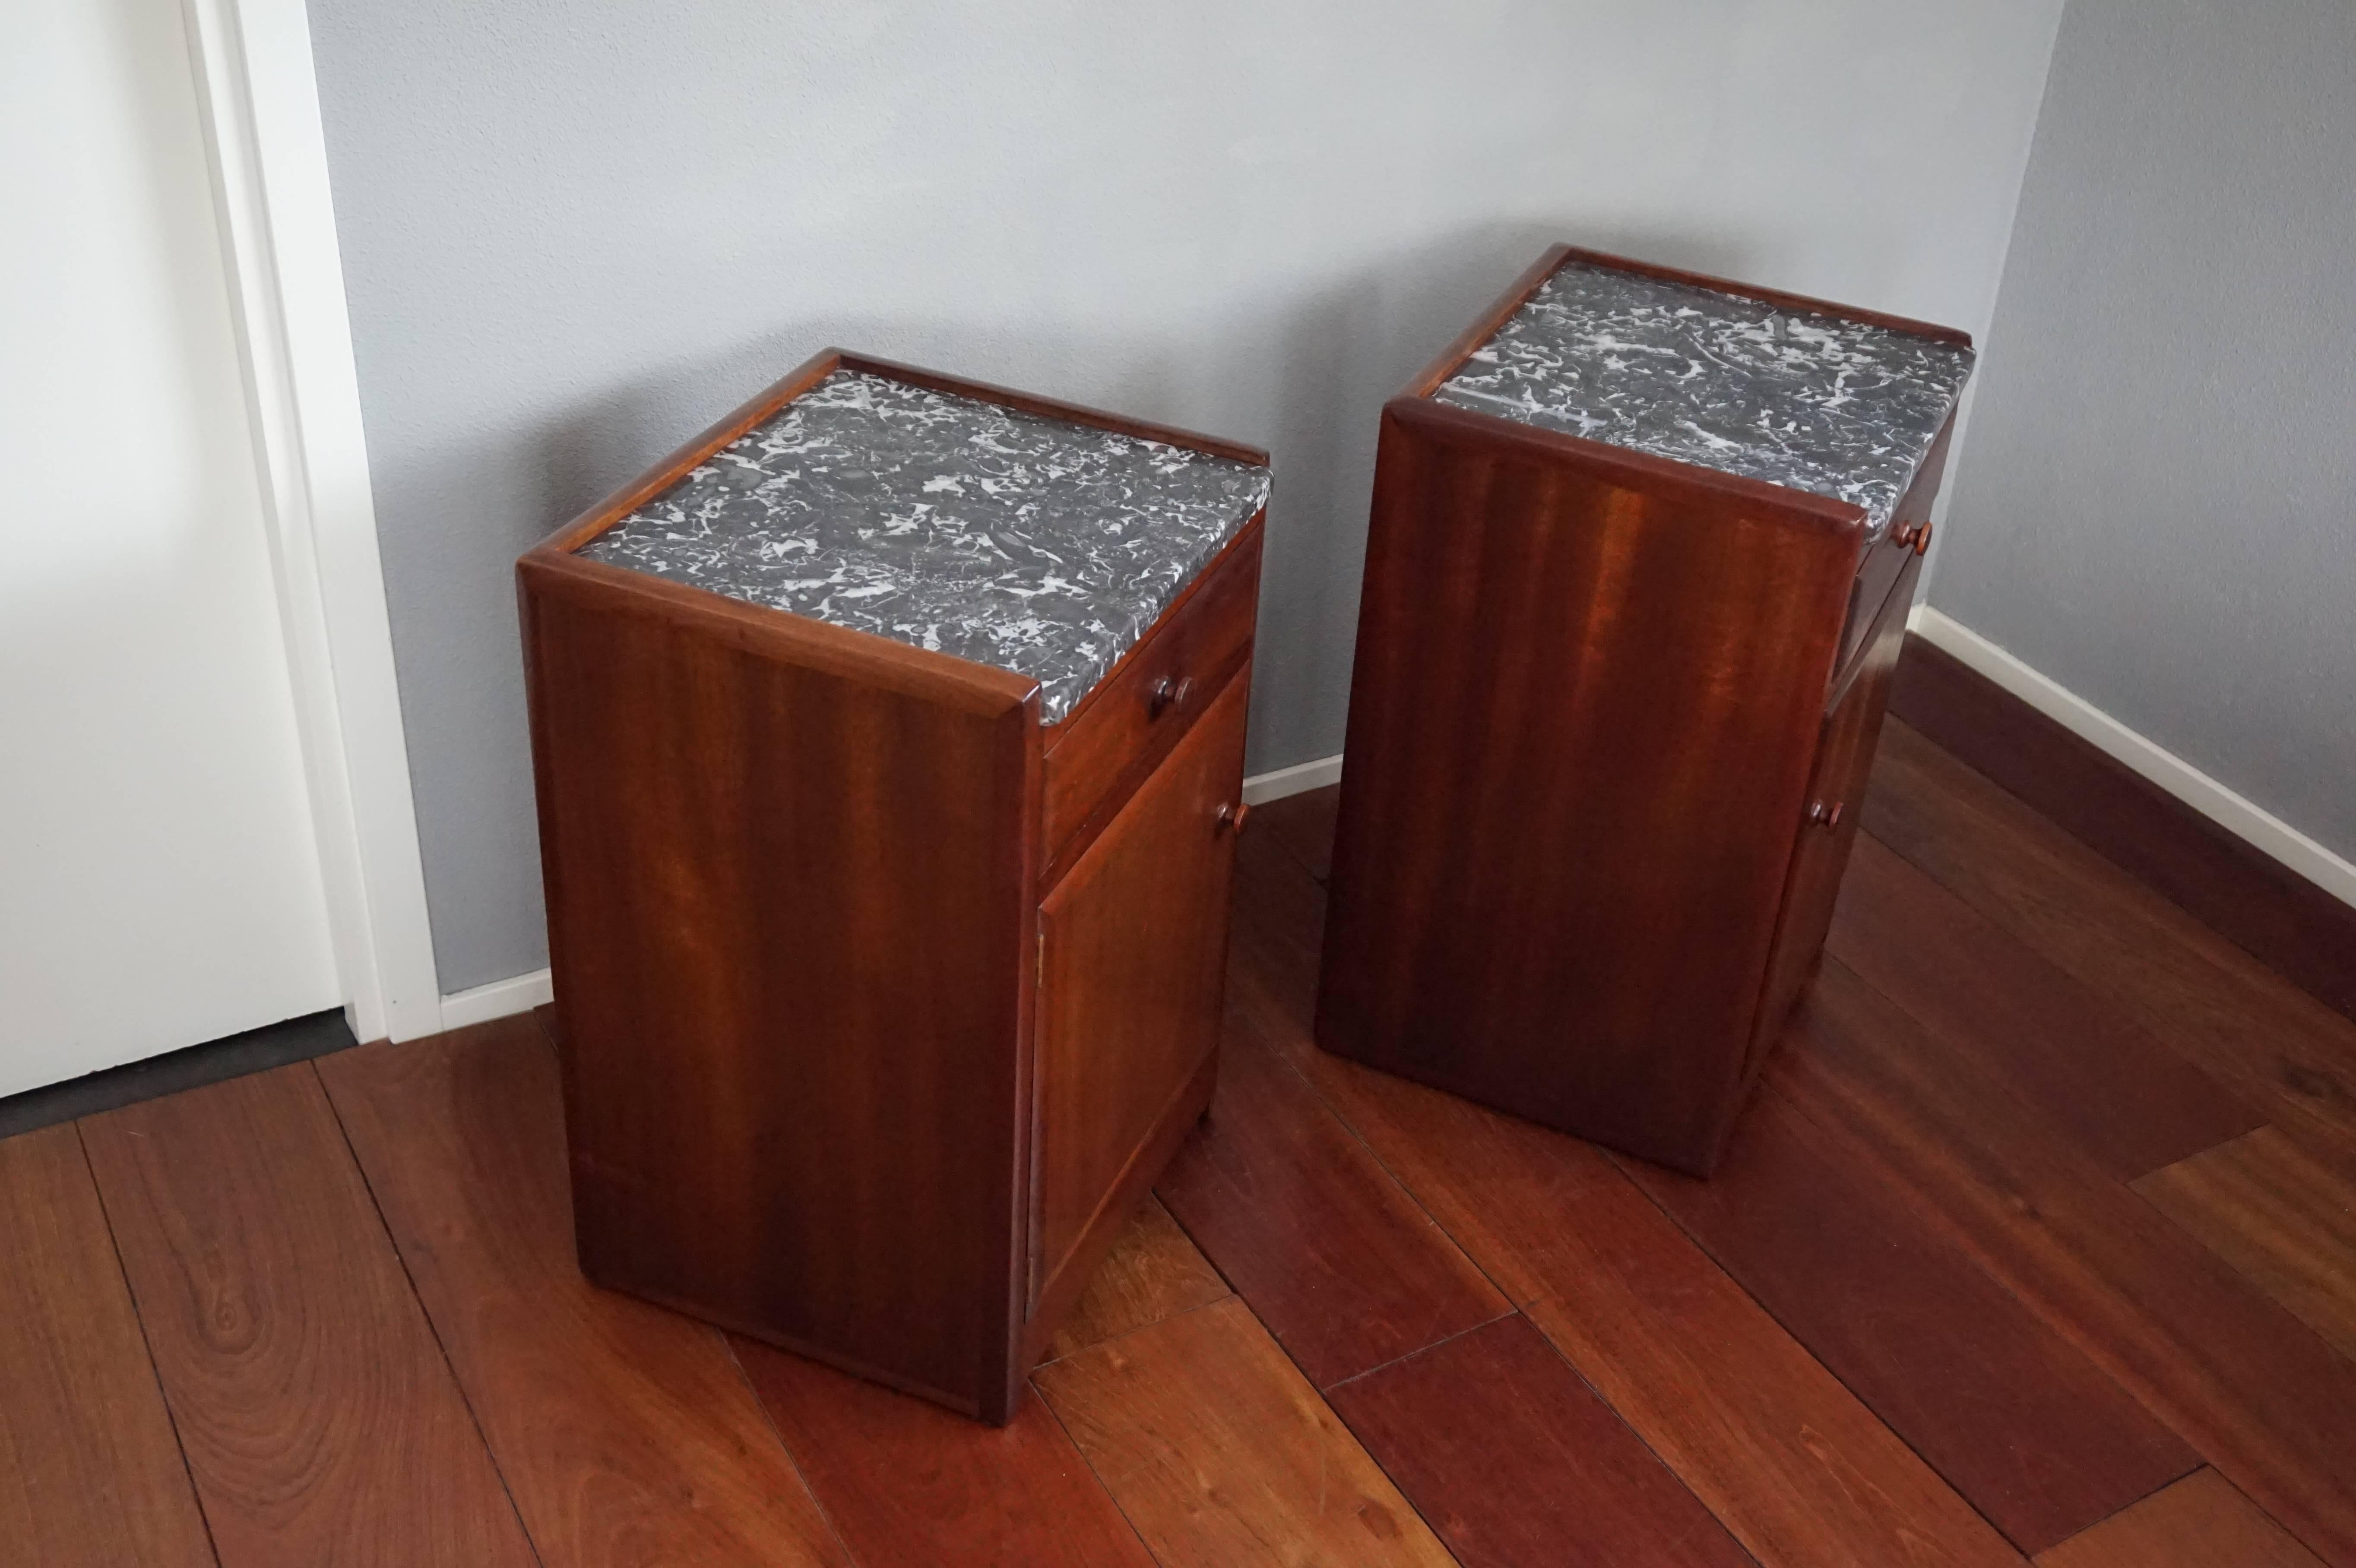 Stunning Art Deco Mahogany & Marble Nightstands Bedside Tables by J.A. Huizinga 1